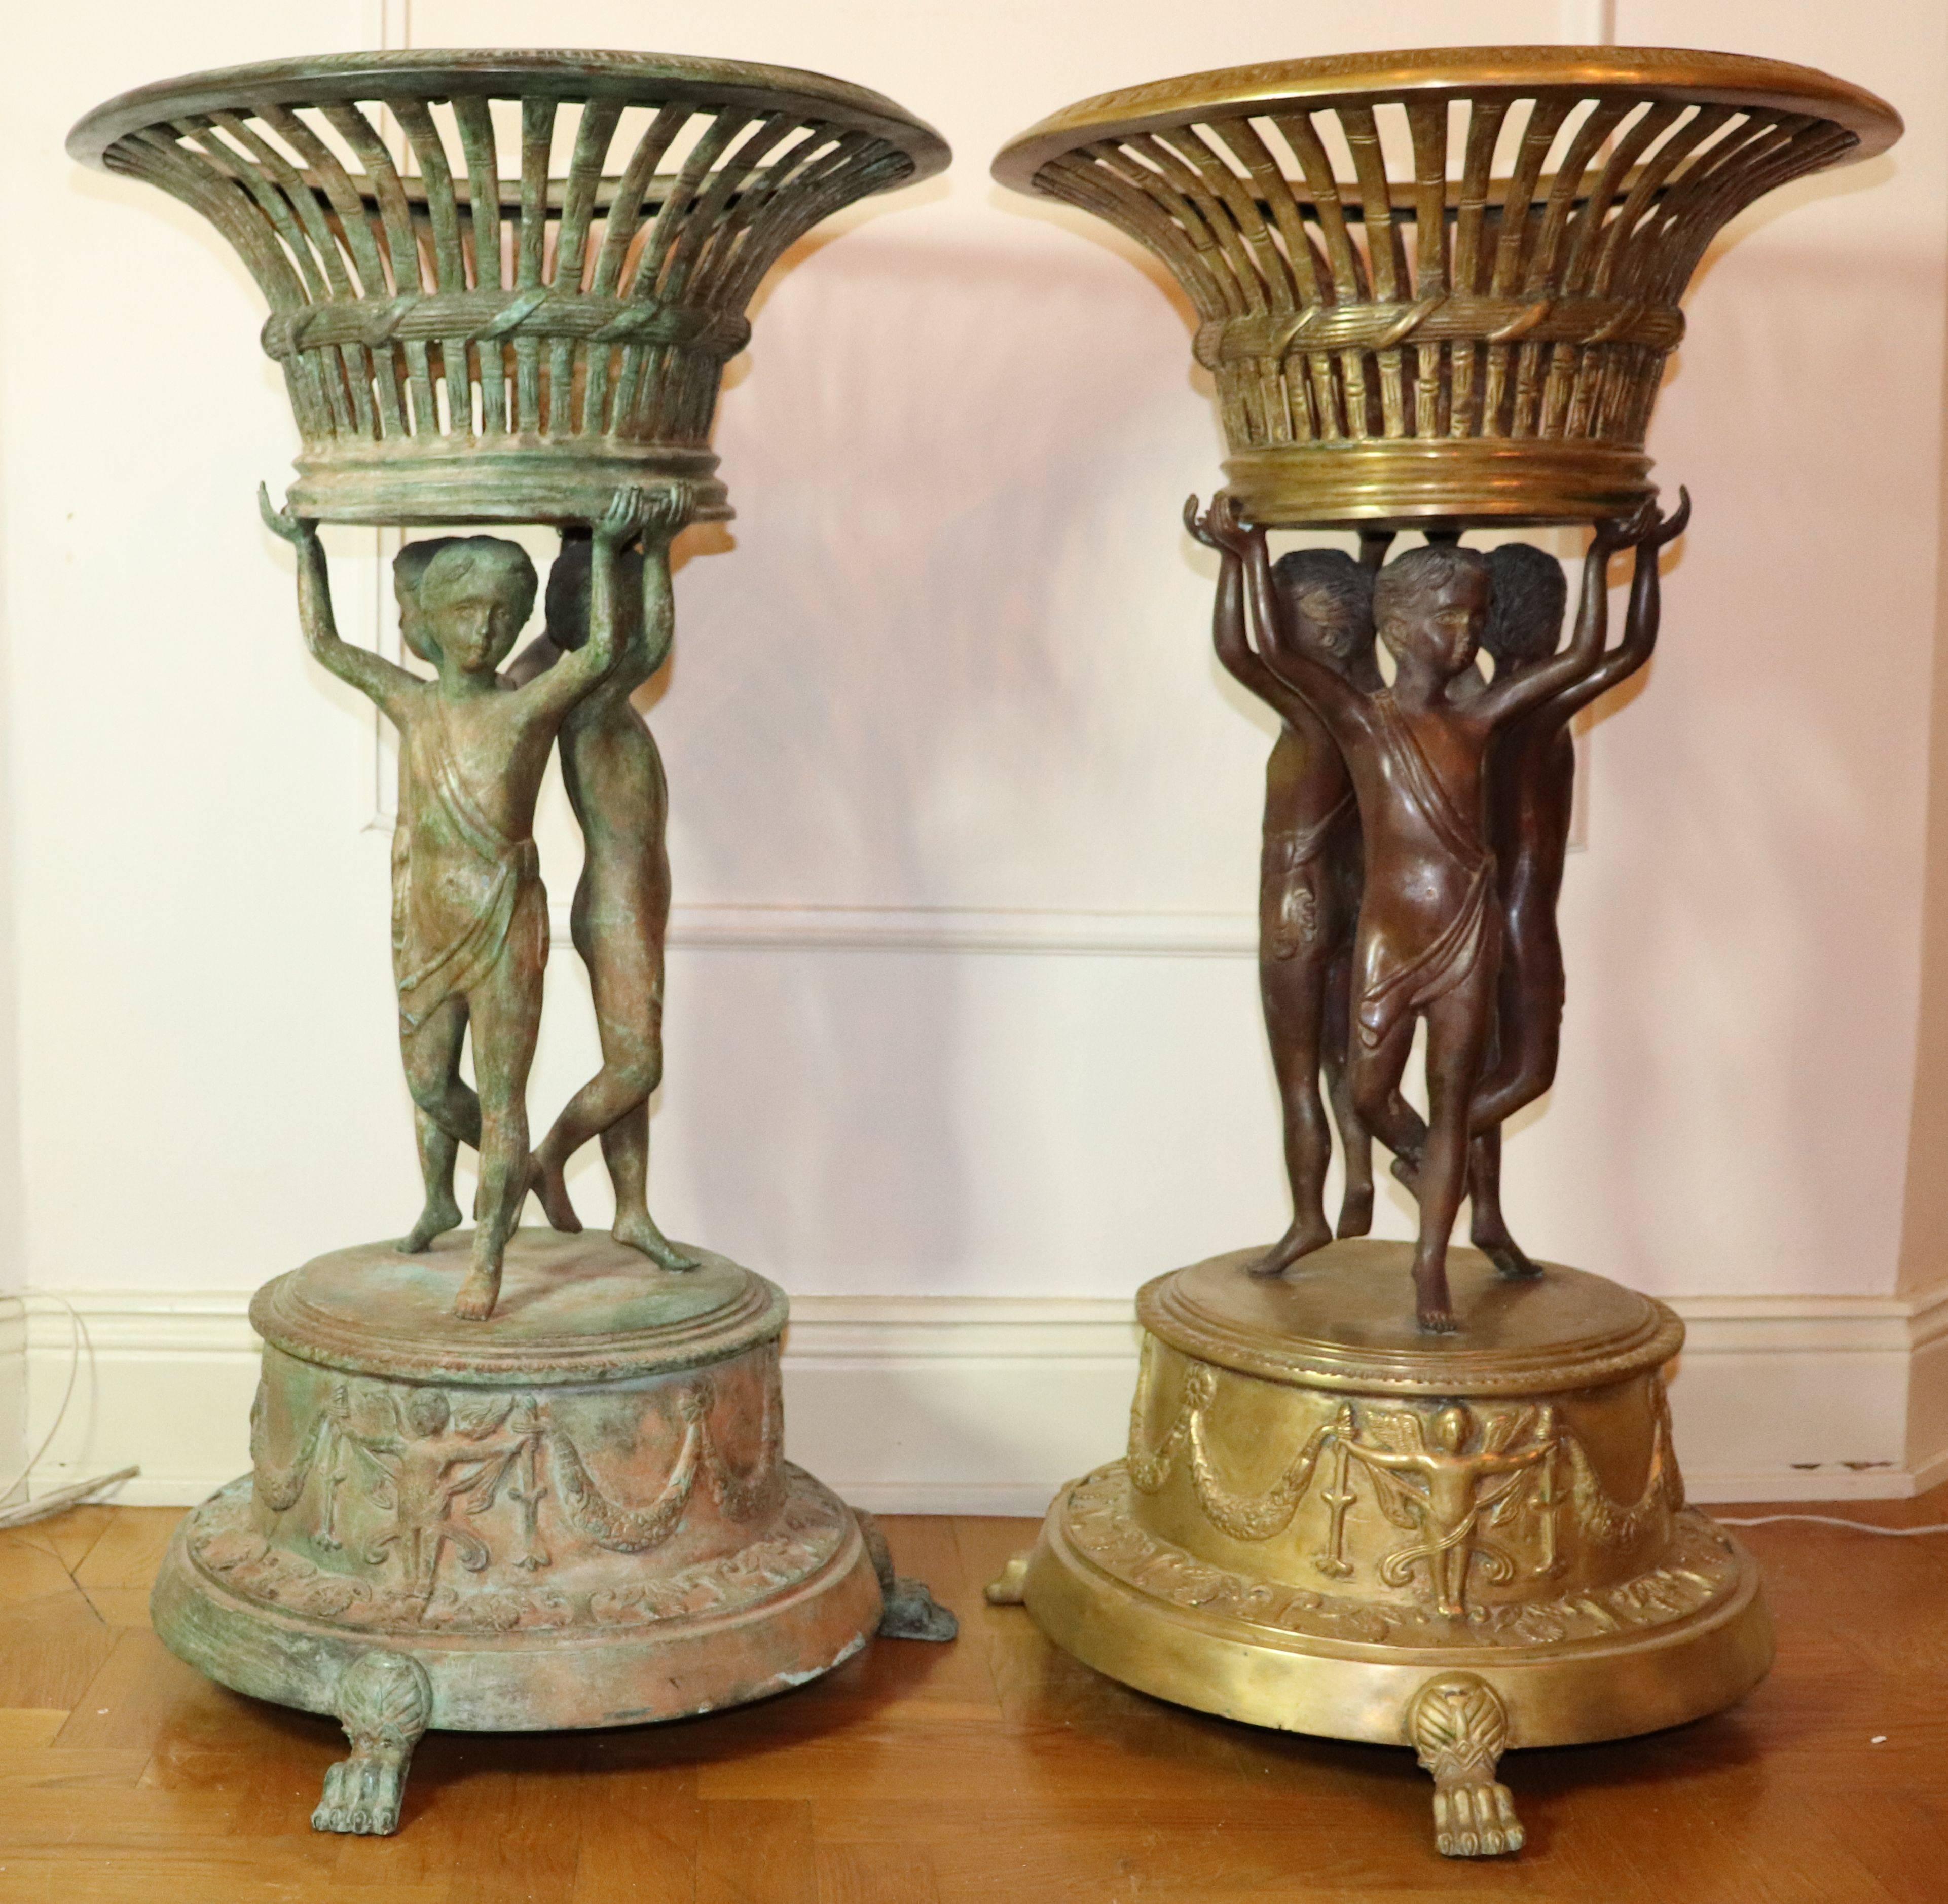 A pair of 19th century or earlier bronze planters/urns, one is cleaned other is still untouched height 95cm.